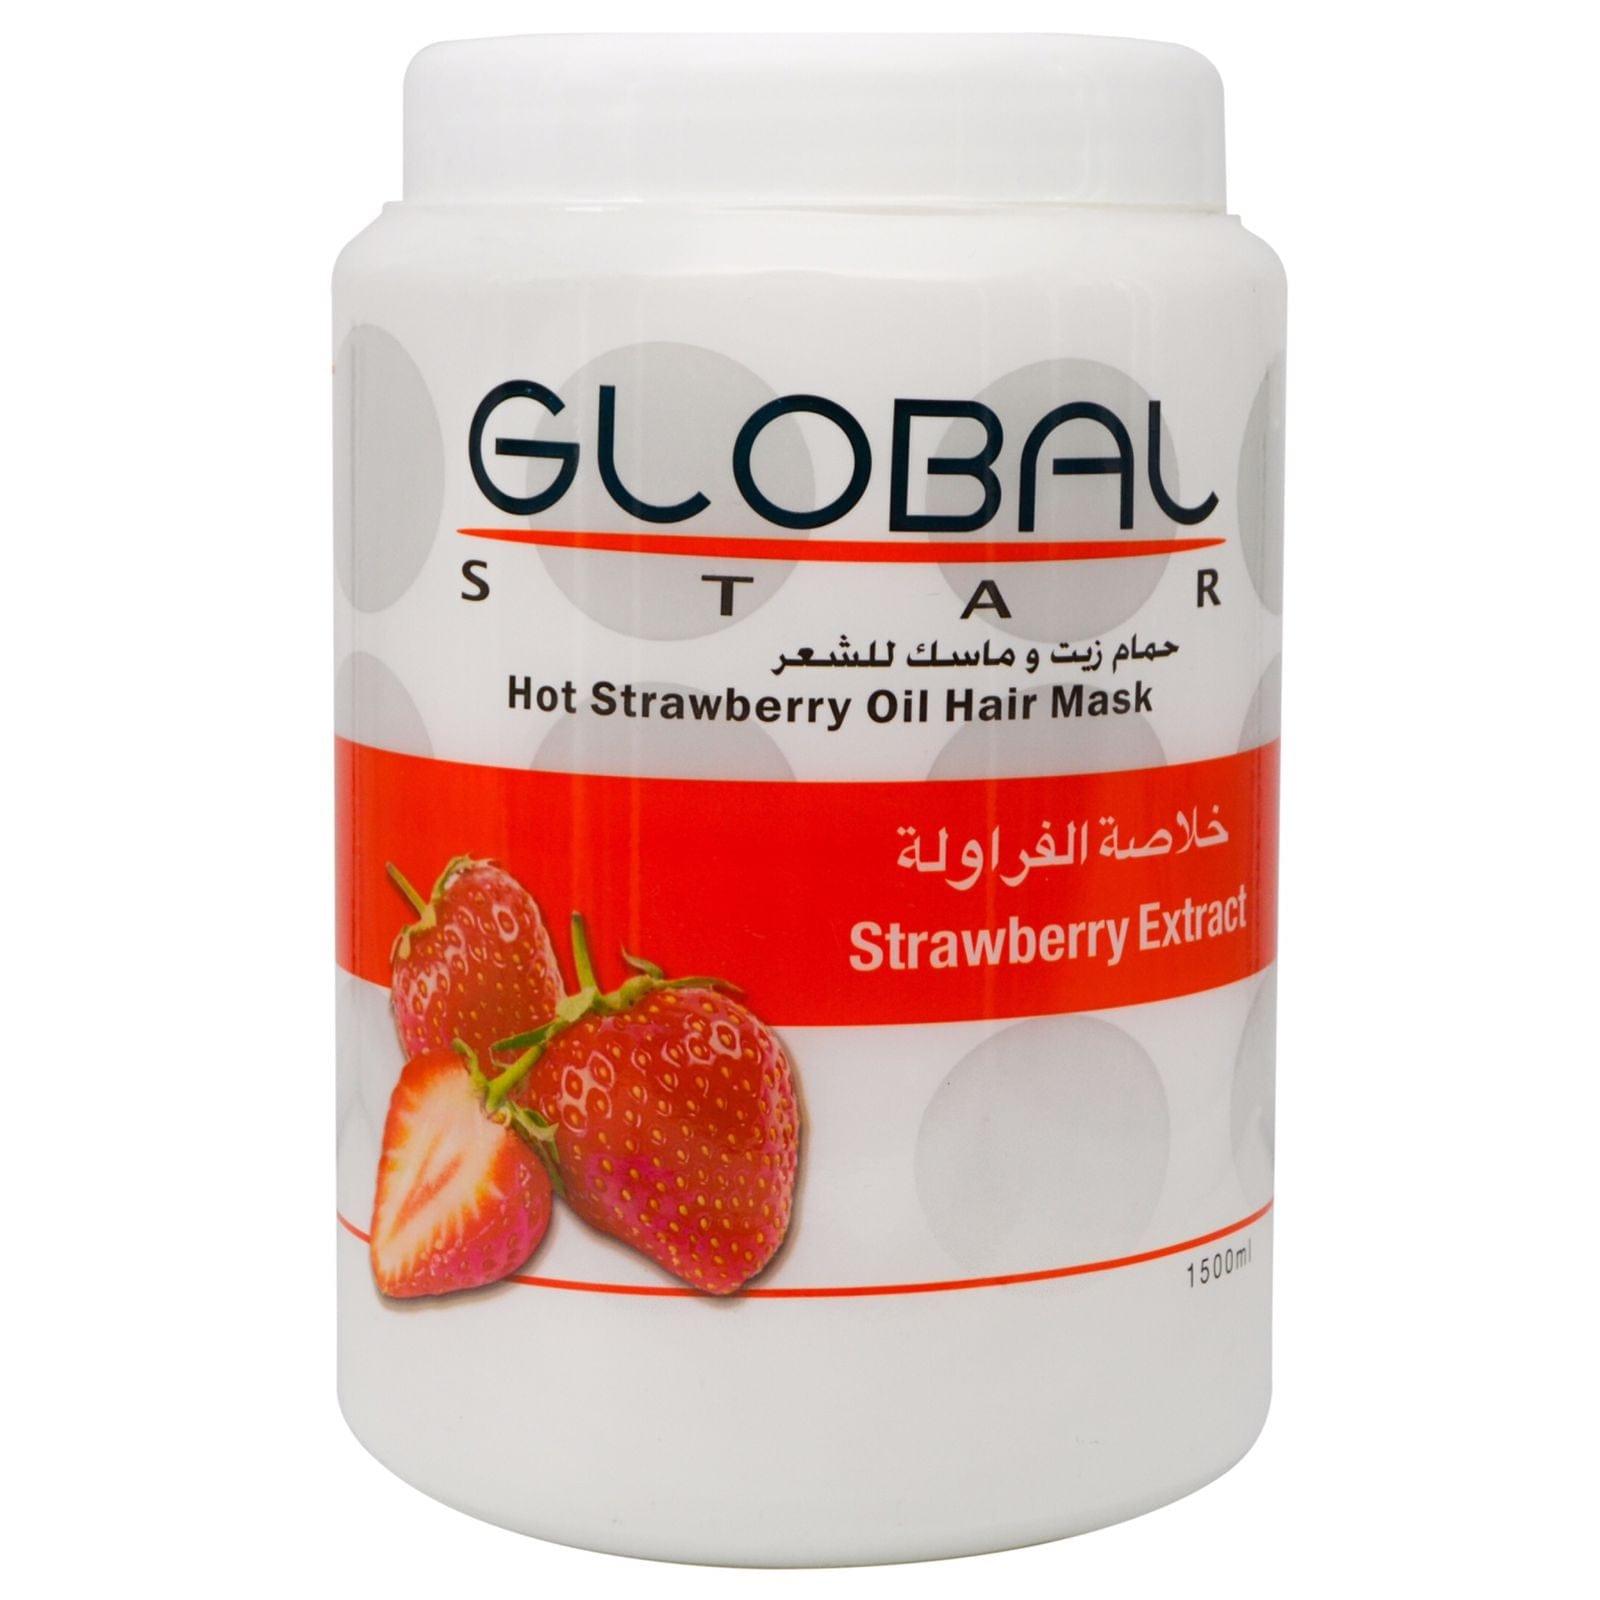 Globalstar Hot Oil Hair Mask Strawberry Extract 1500ml